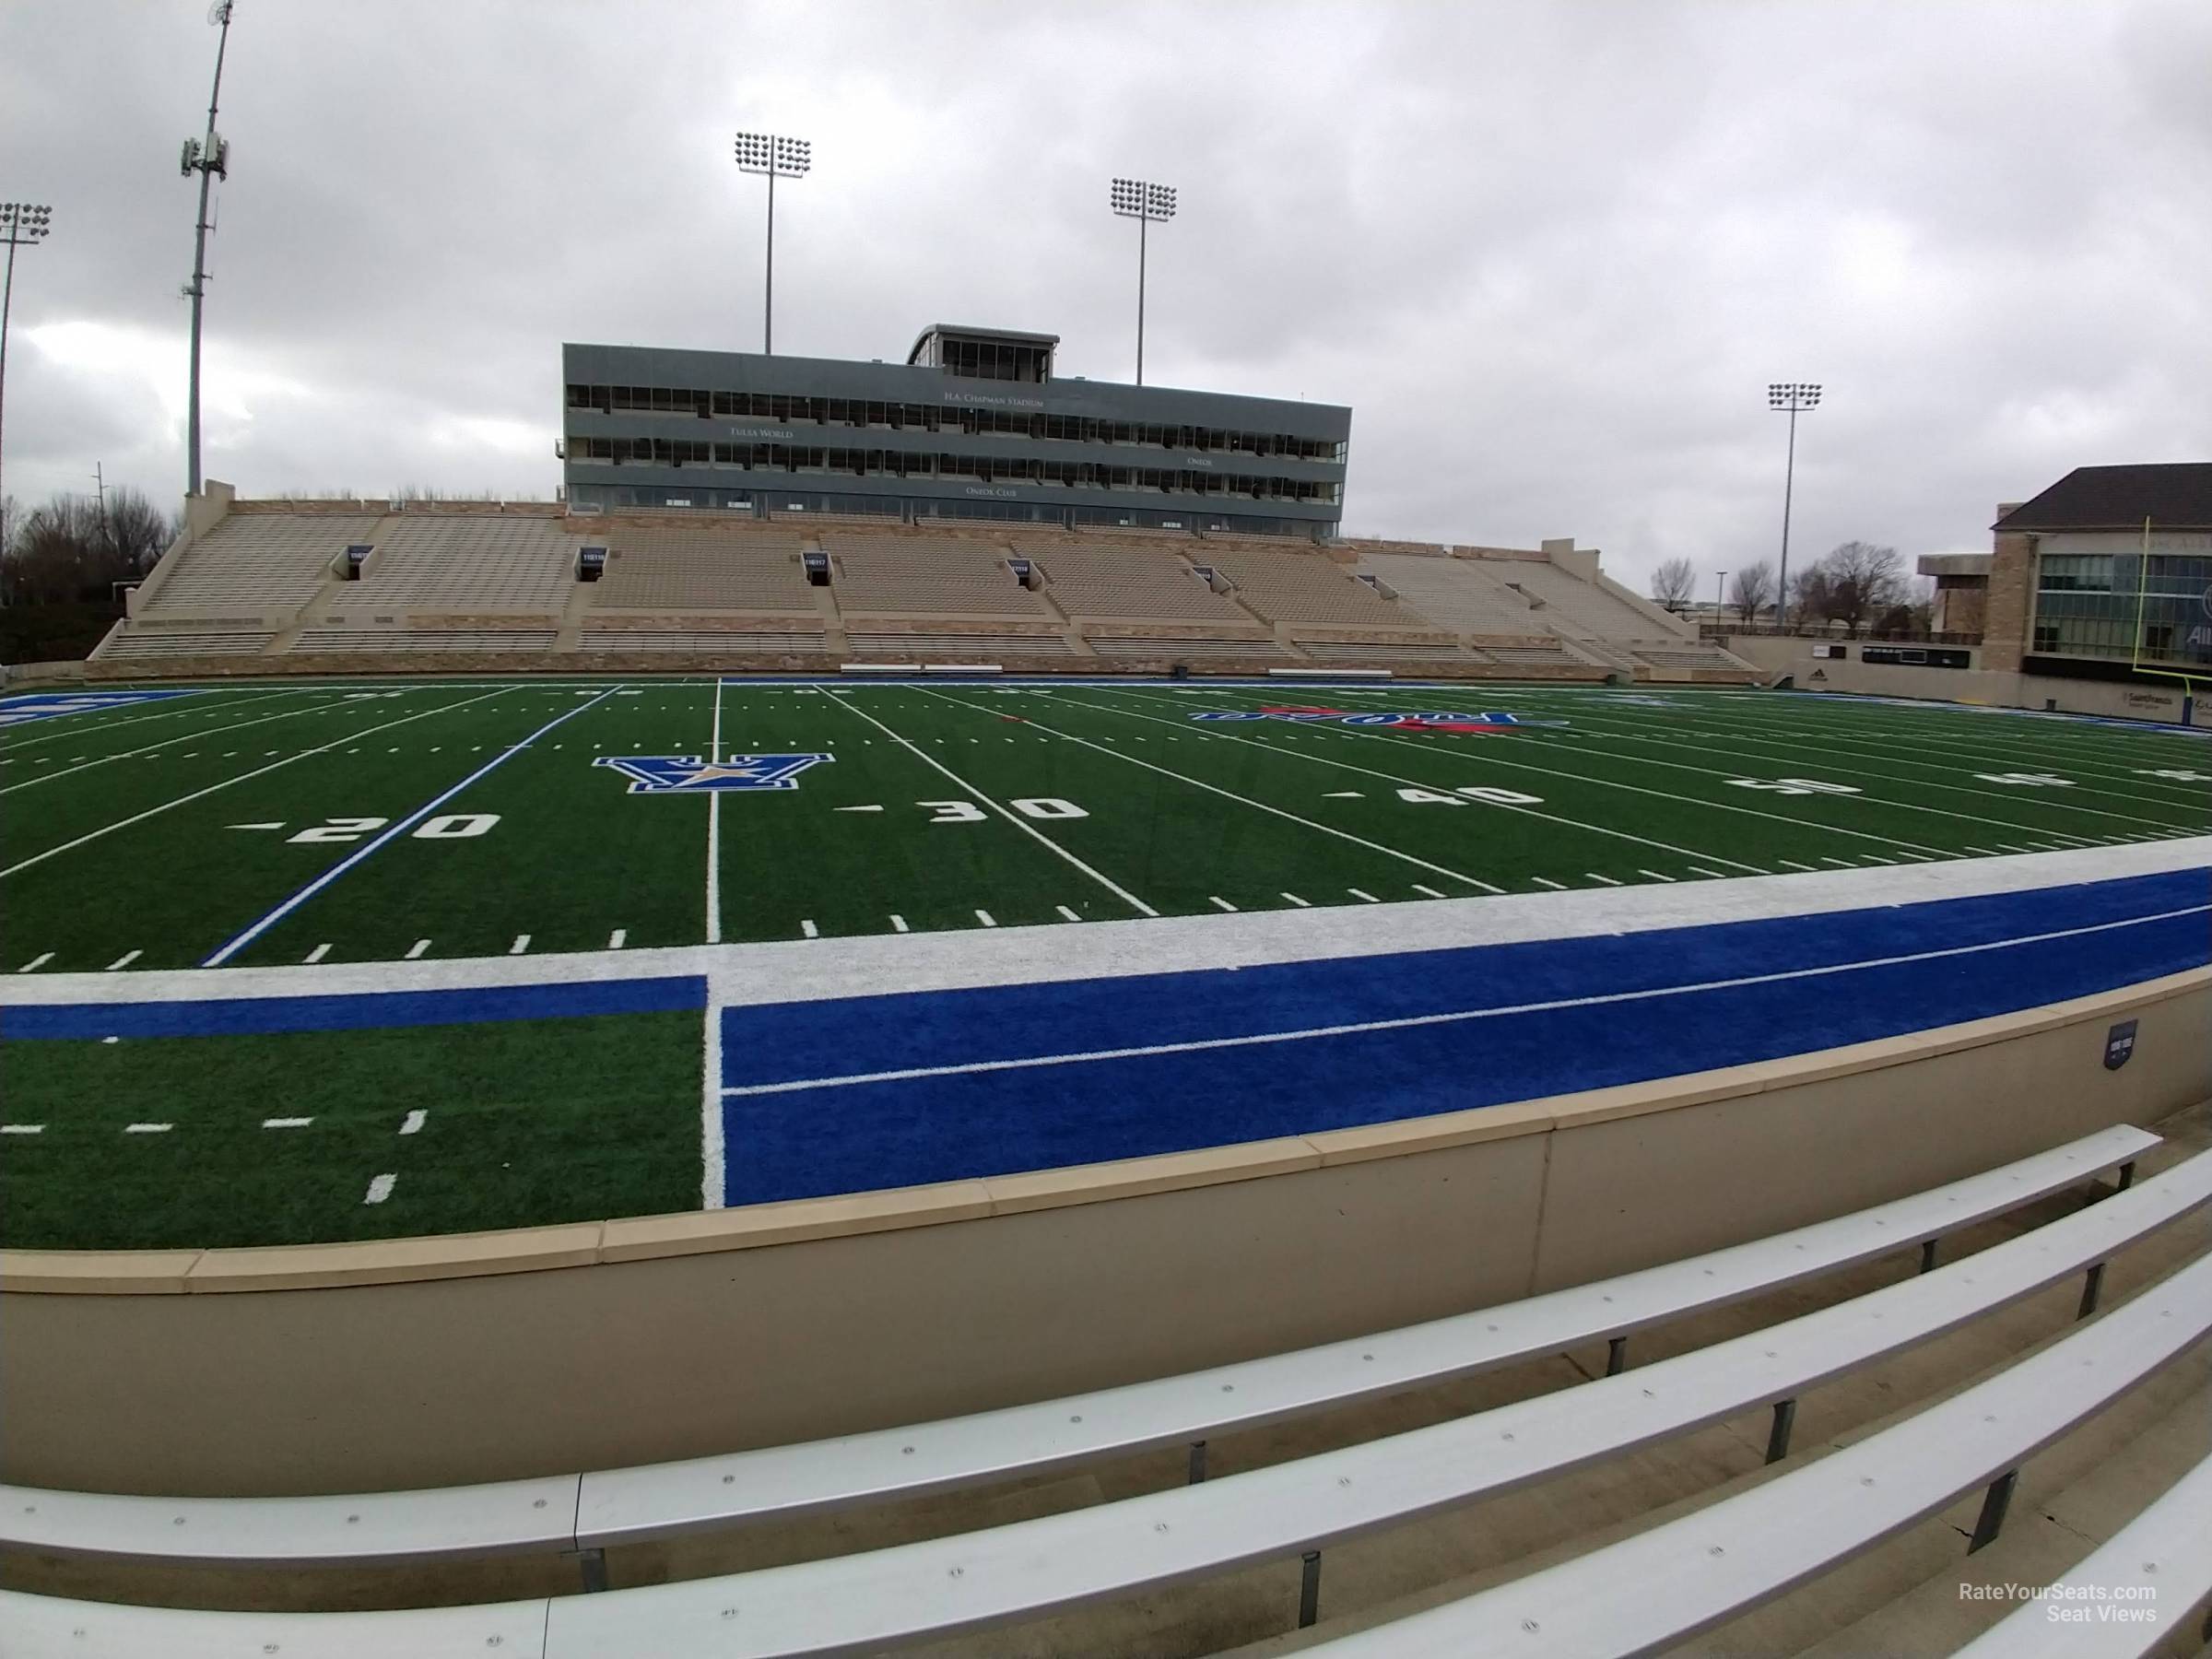 section 106, row 5 seat view  - h.a. chapman stadium